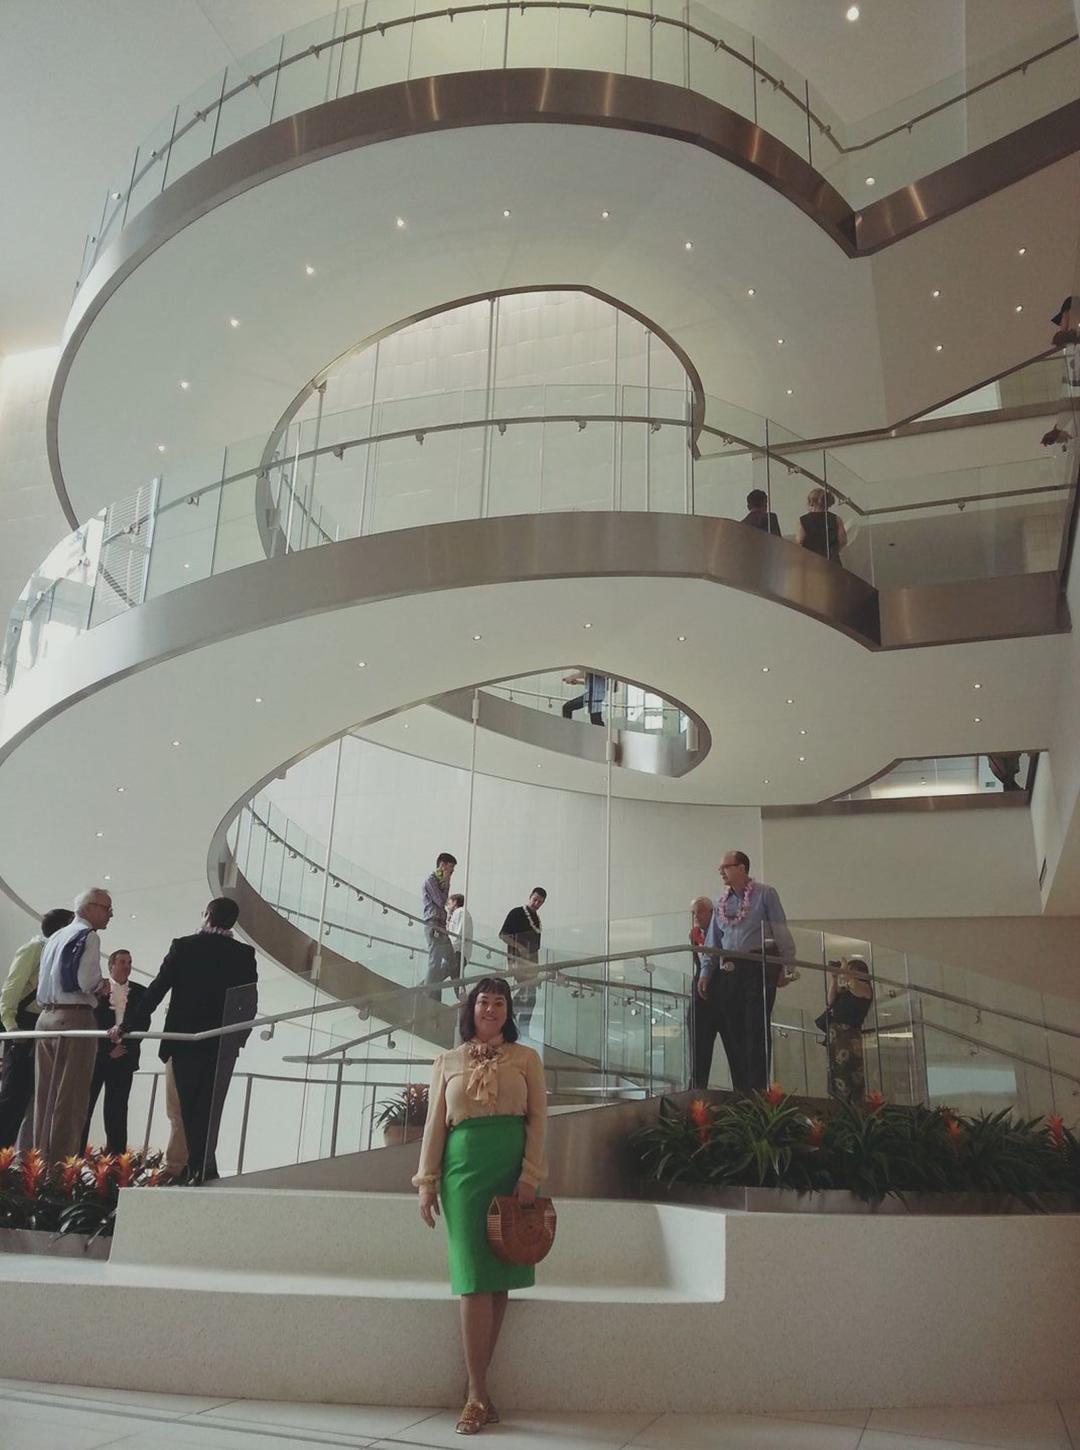 Ellen Krusi stands in front of a 3-story spiral staircase at Lloyd Center Mall in 2017